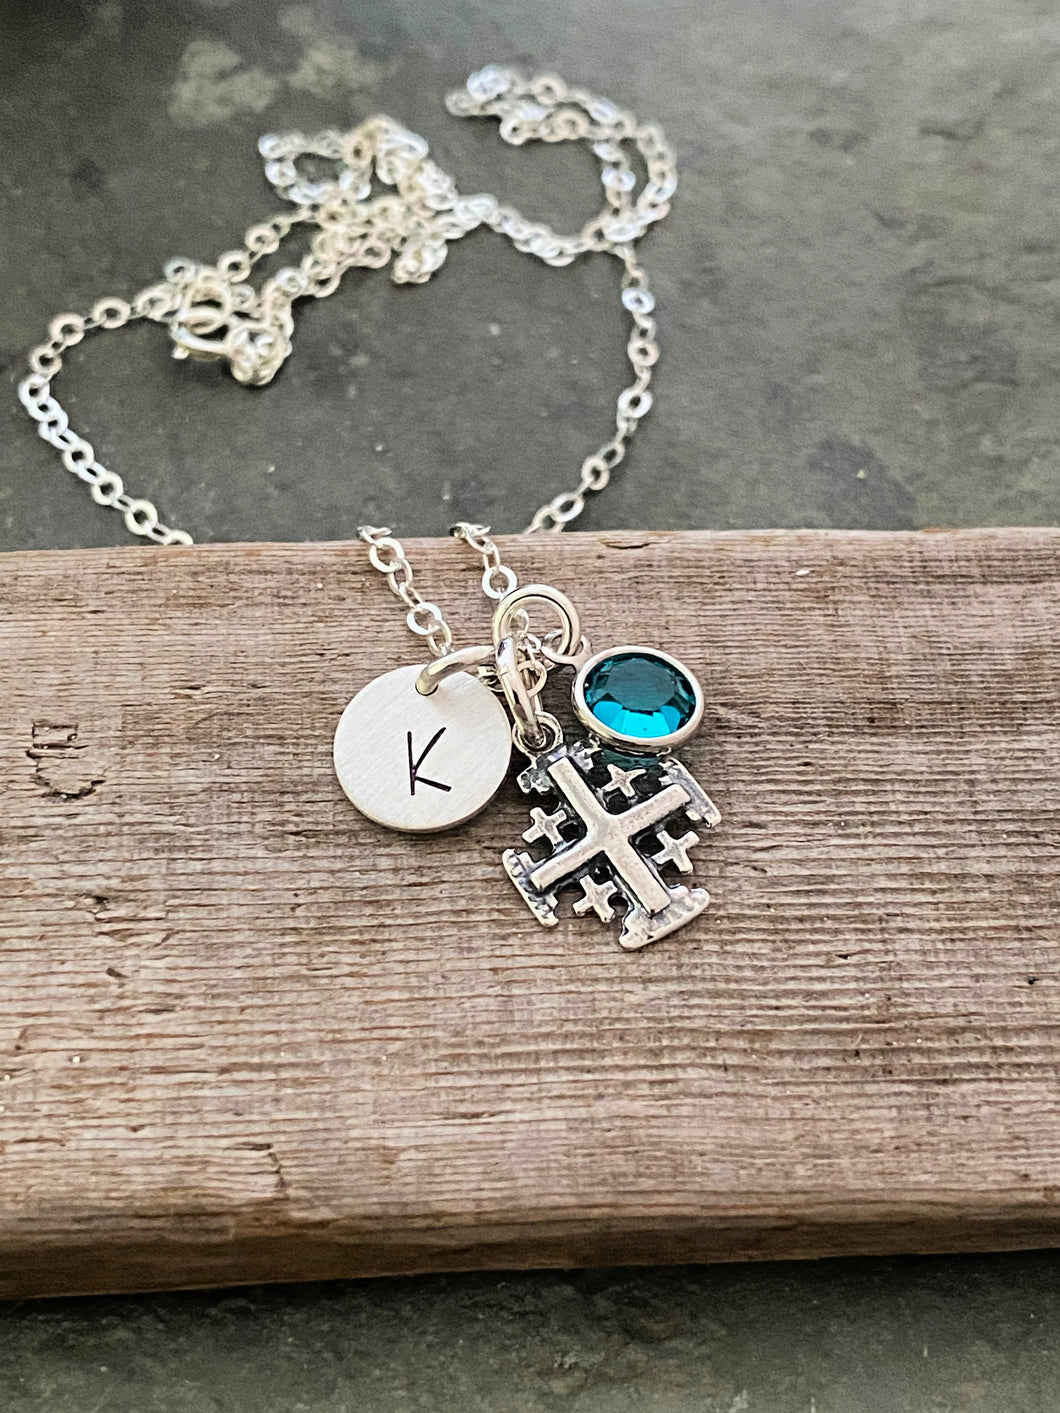 Jerusalem Cross necklace - personalized sterling silver Charm Necklace  Swarovski crystal birthstone and Initial Charm Made to Order, Faith